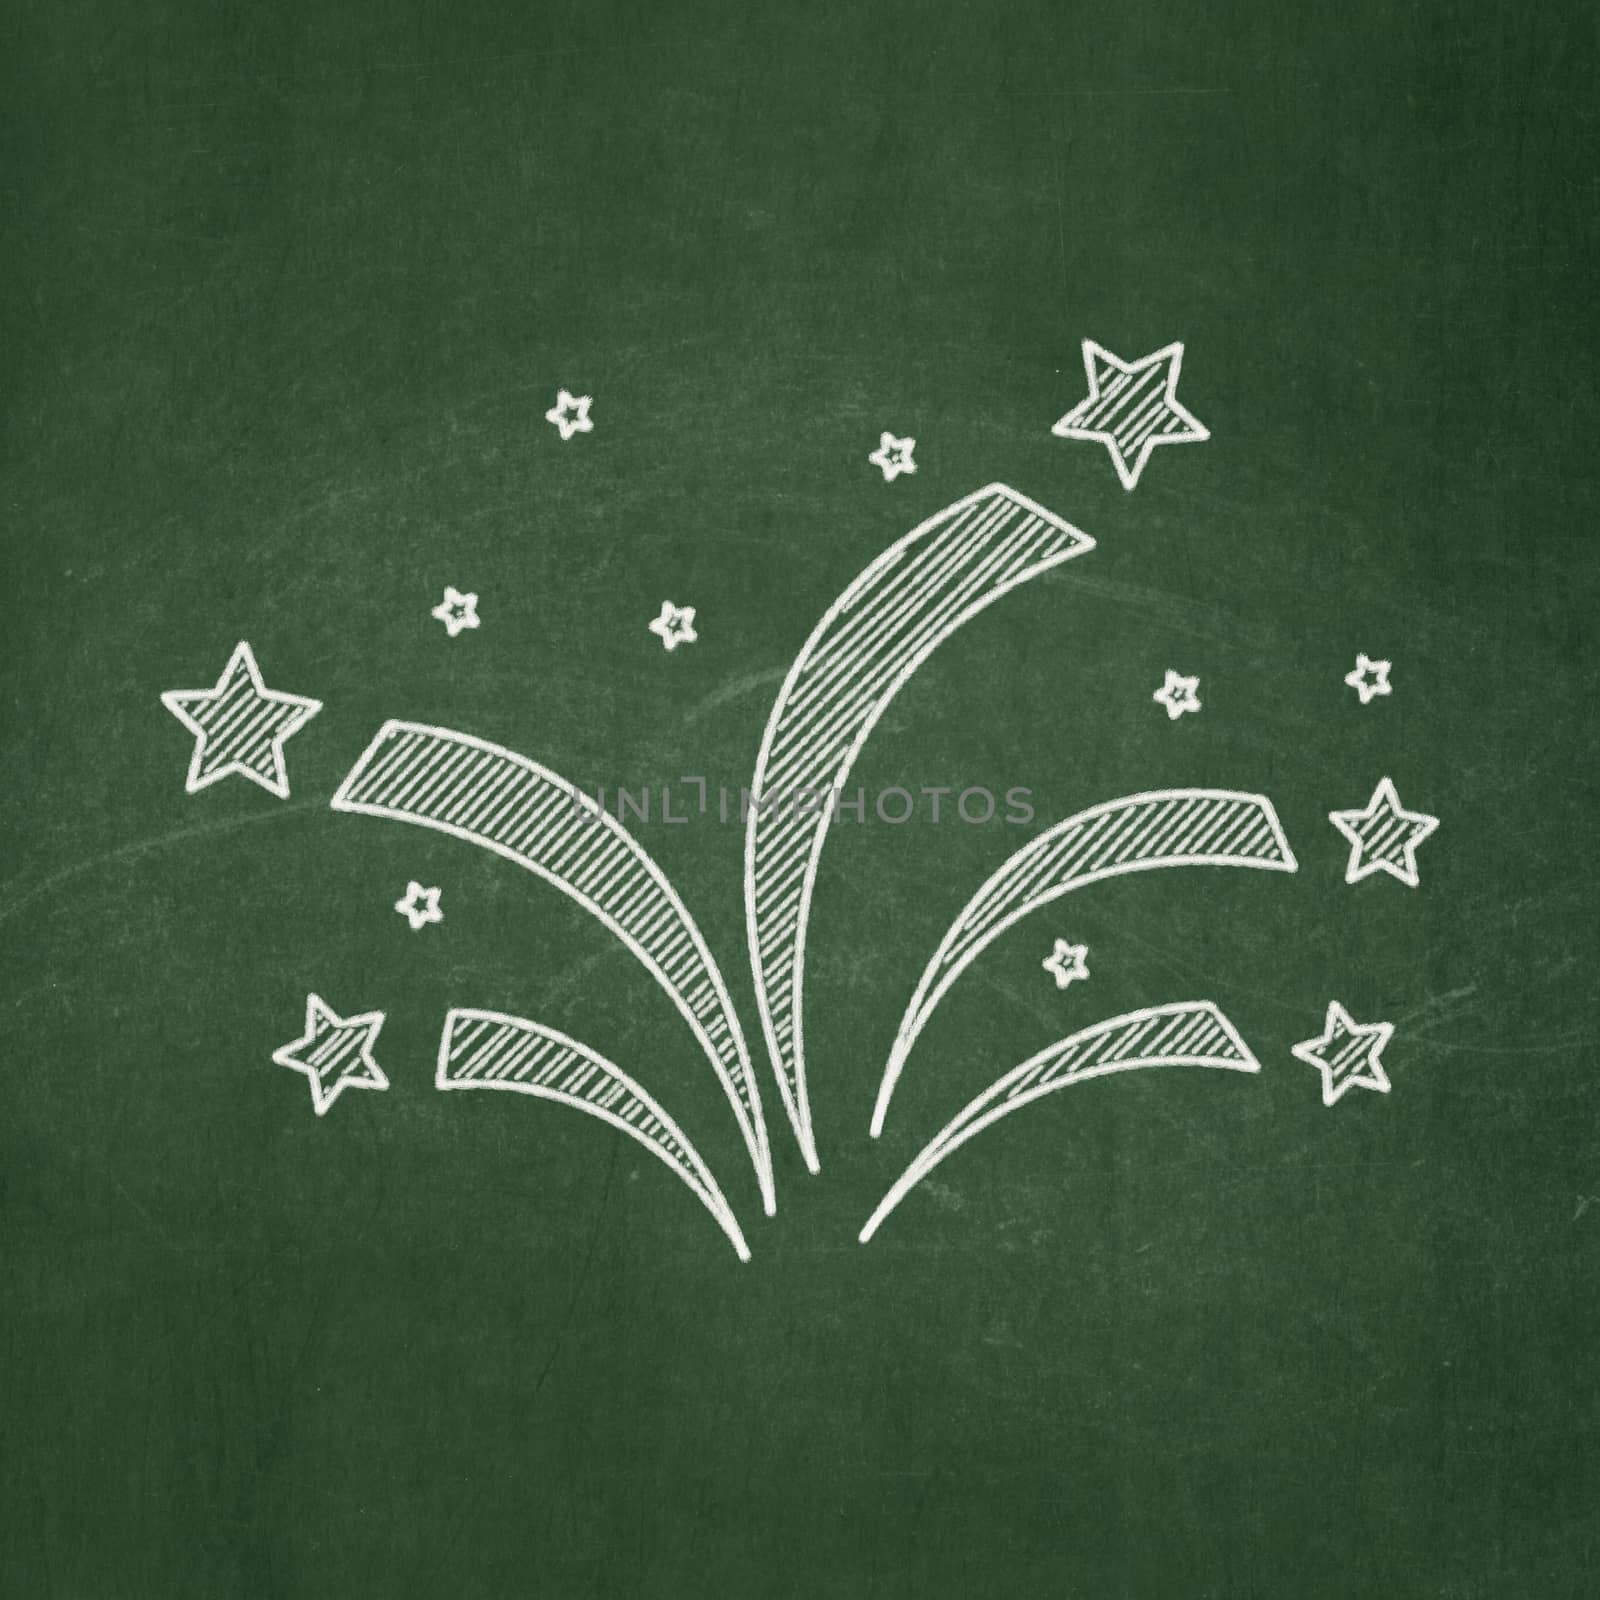 Entertainment, concept: Fireworks icon on Green chalkboard background